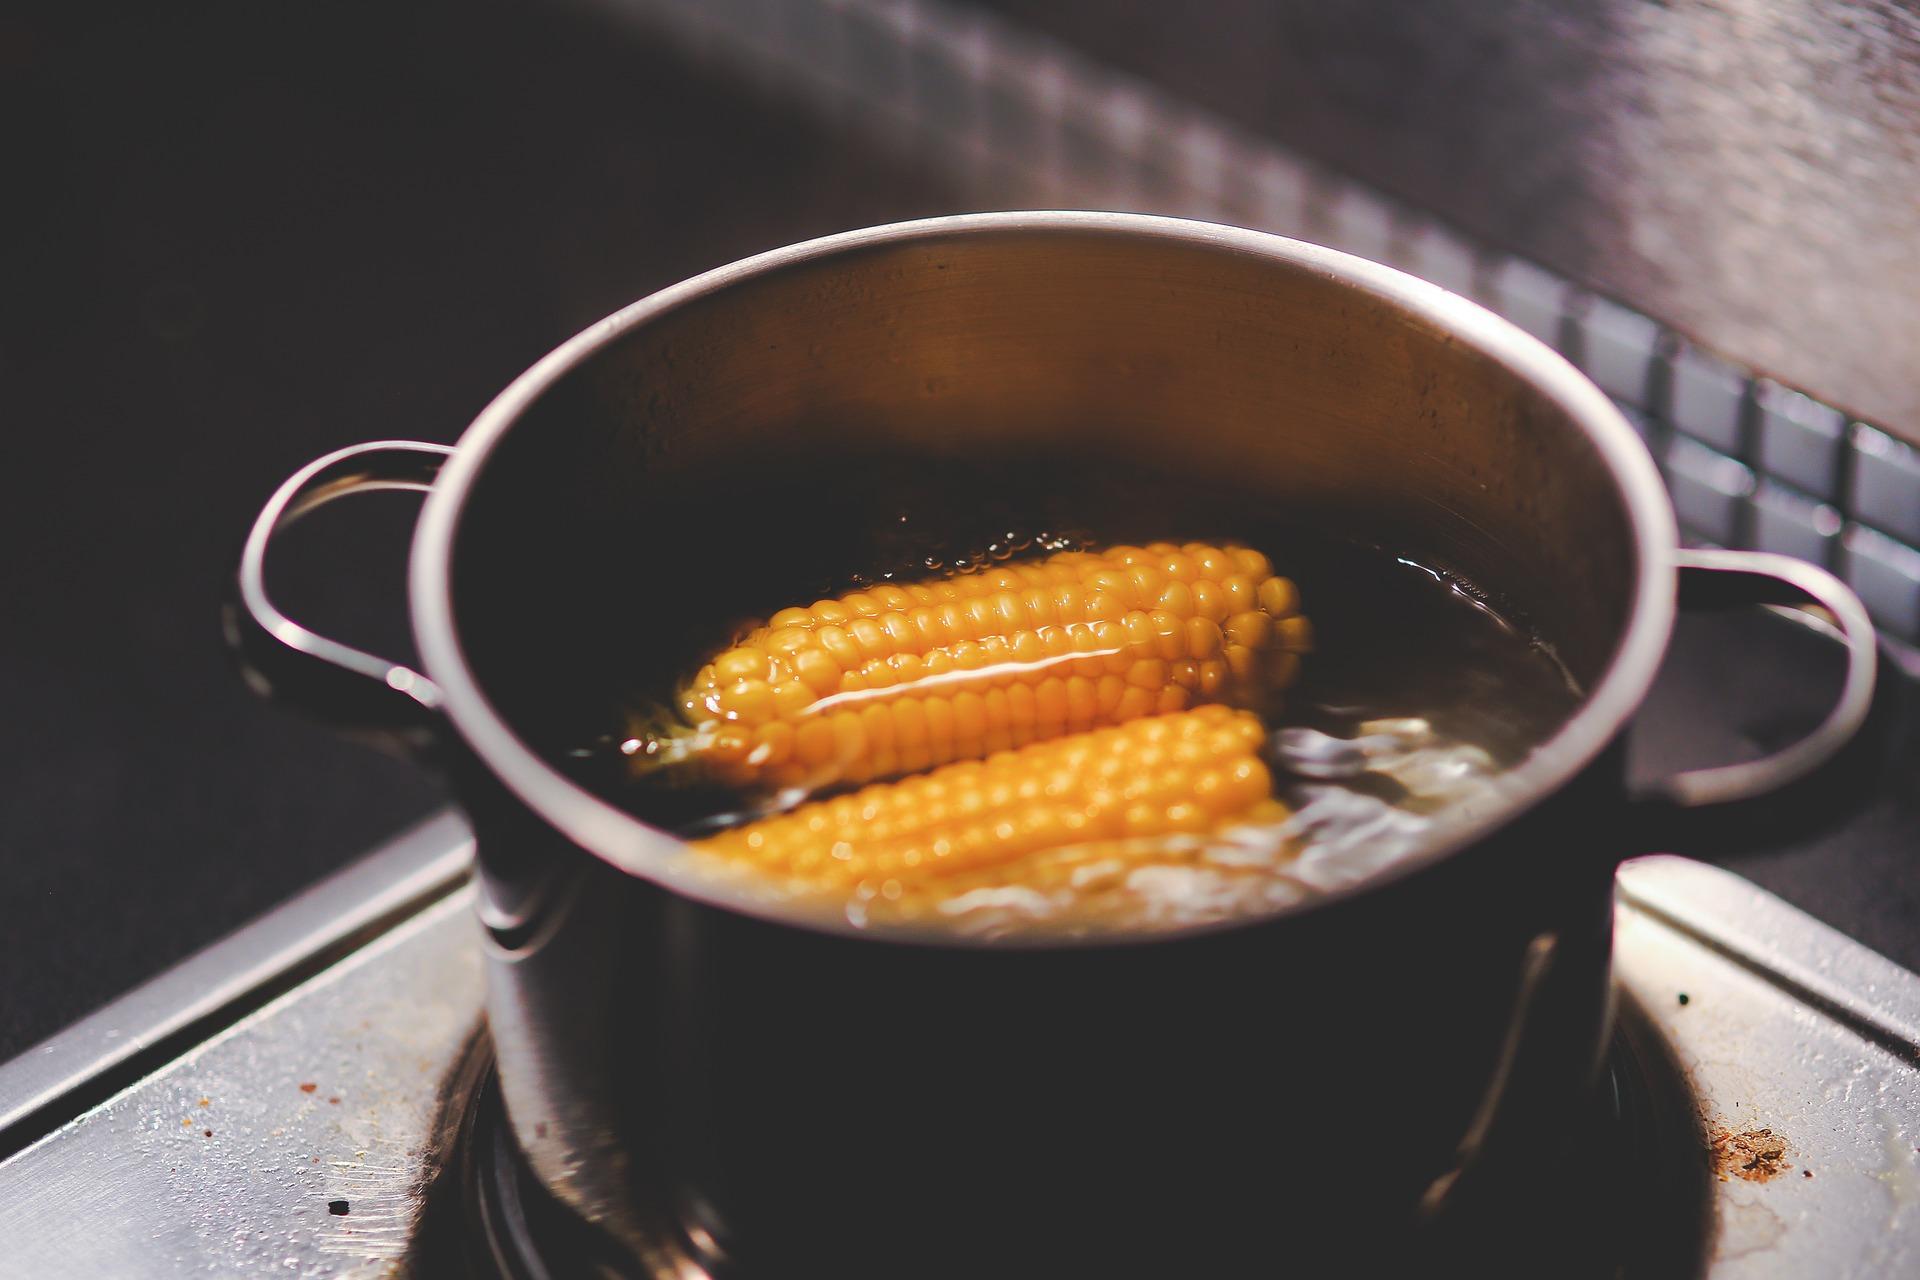 A pot of boiling water cooks two corns.